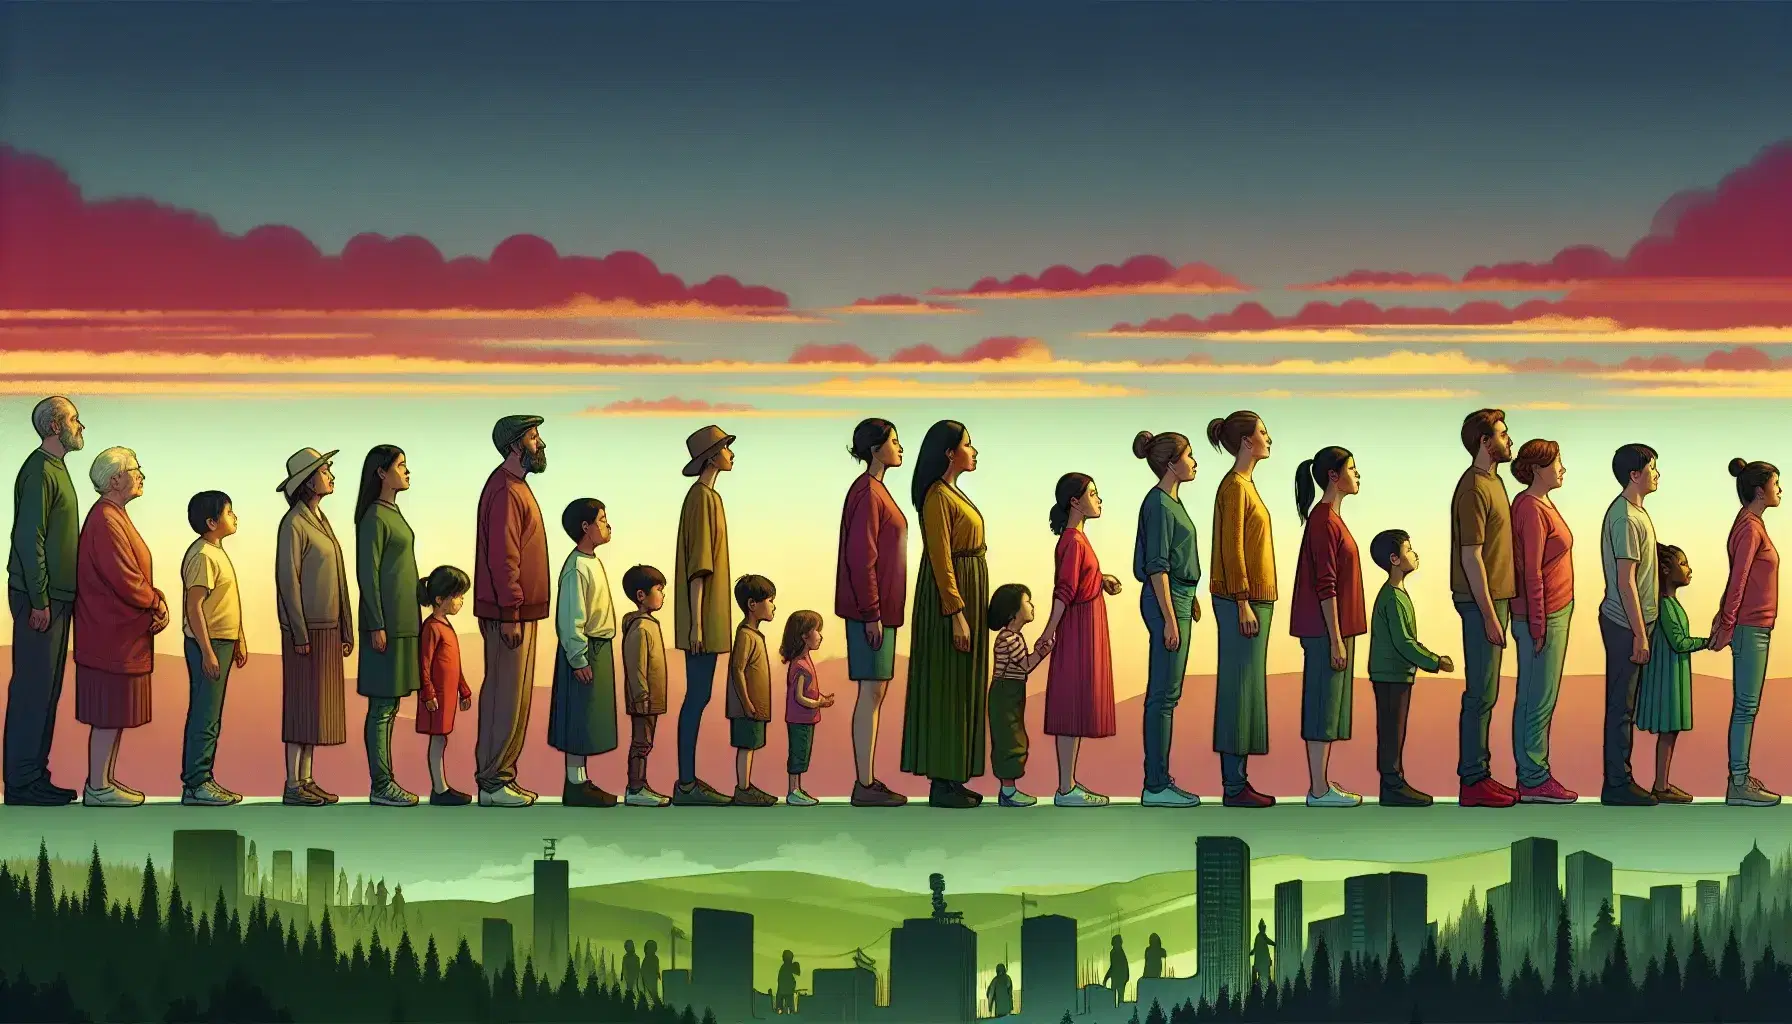 Diverse group standing in profile, from forest to cityscape, with adults and children in various attire, under a gradient sunset sky.